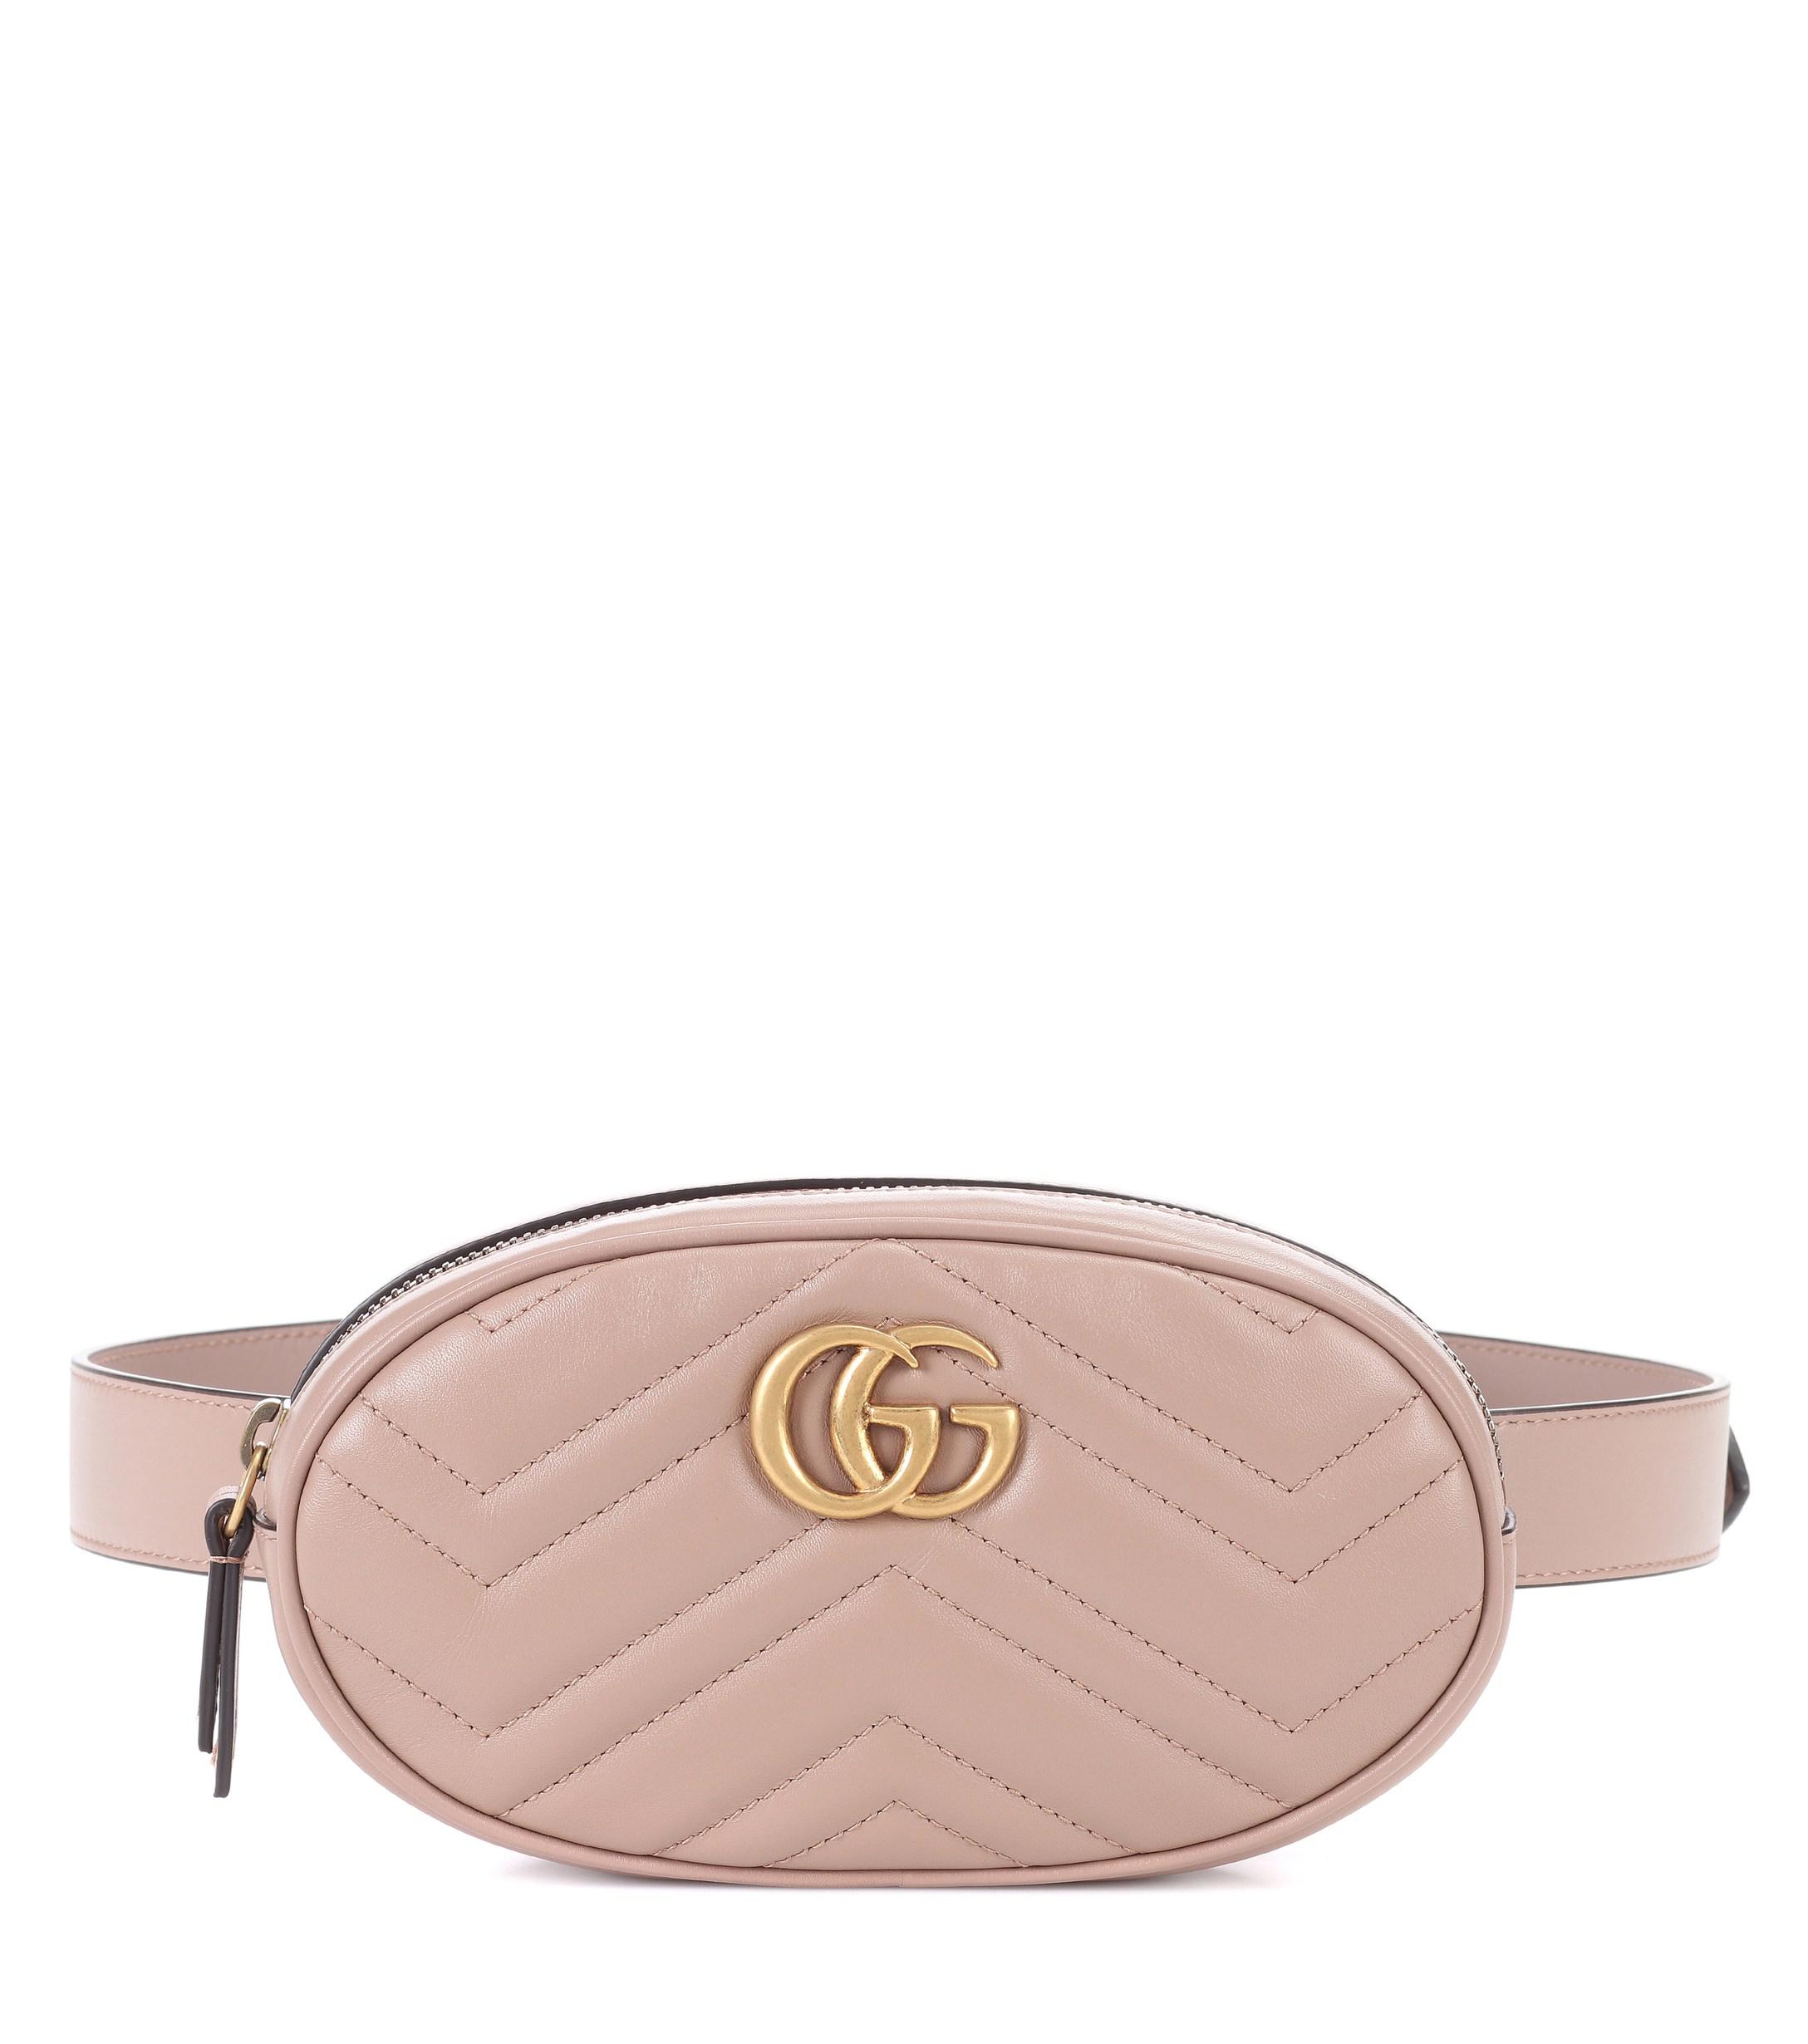 Gucci GG Marmont Leather Belt Bag in Beige (Natural) - Lyst